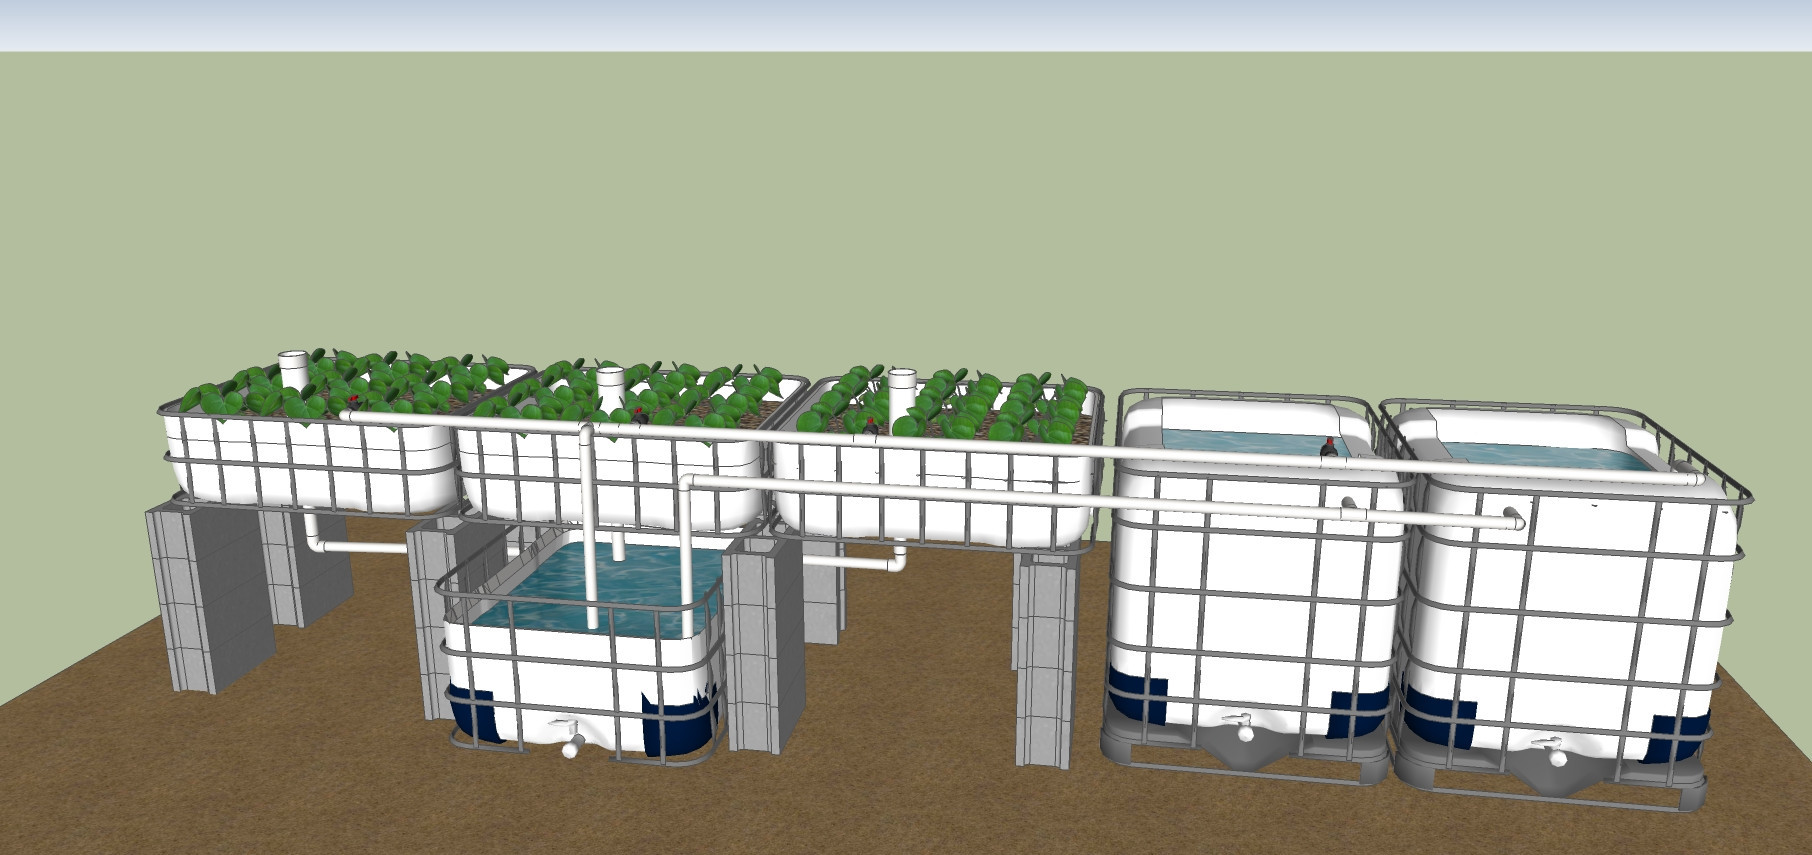 Aquaponics DIY Plans
 Aquaponics Diy Plans Aquaponics – How To Build An